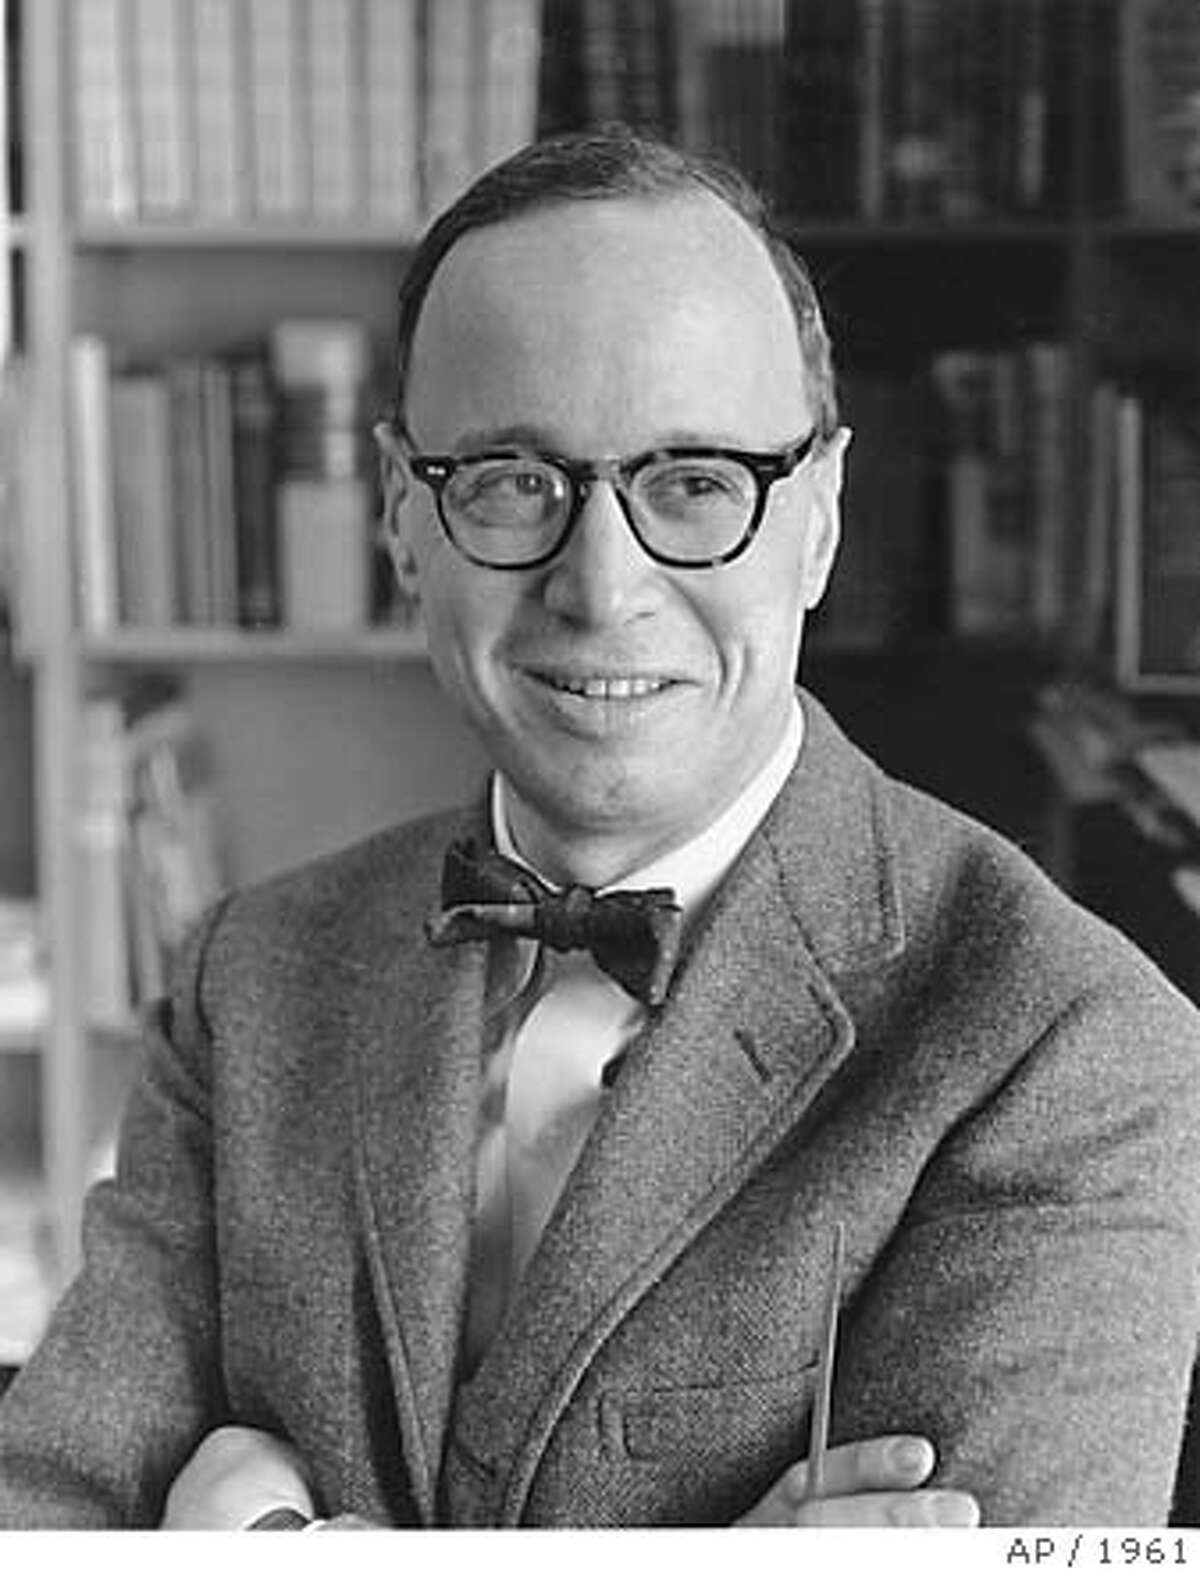 This is a photo of Harvard Professor Arthur M. Schlesinger Jr. in Cambridge, Ma., on Jan. 25, 1961. He was the special assistant to President Kennedy. (AP Photo)